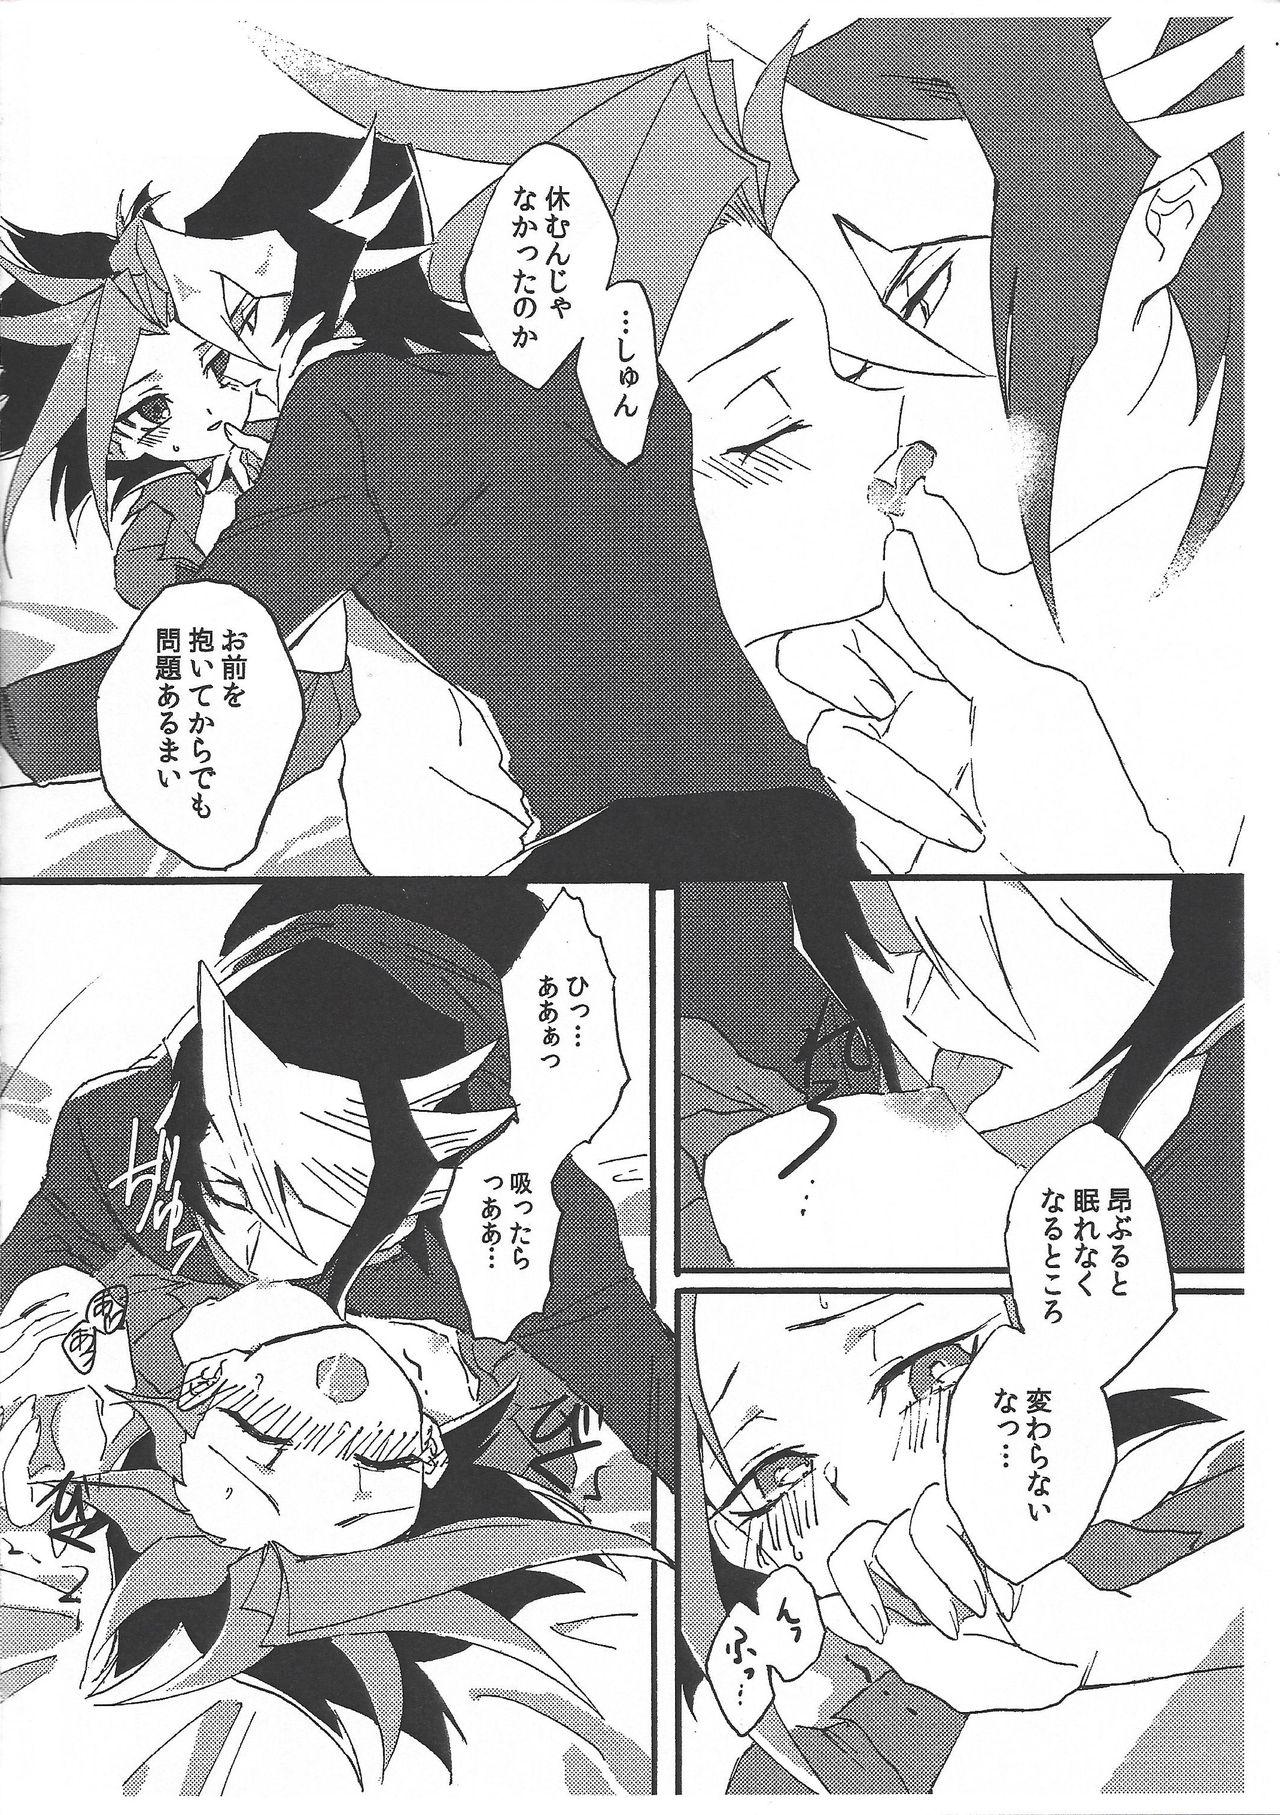 Suck Cock GHOST ROOM - Yu-gi-oh arc-v Gostosa - Page 5